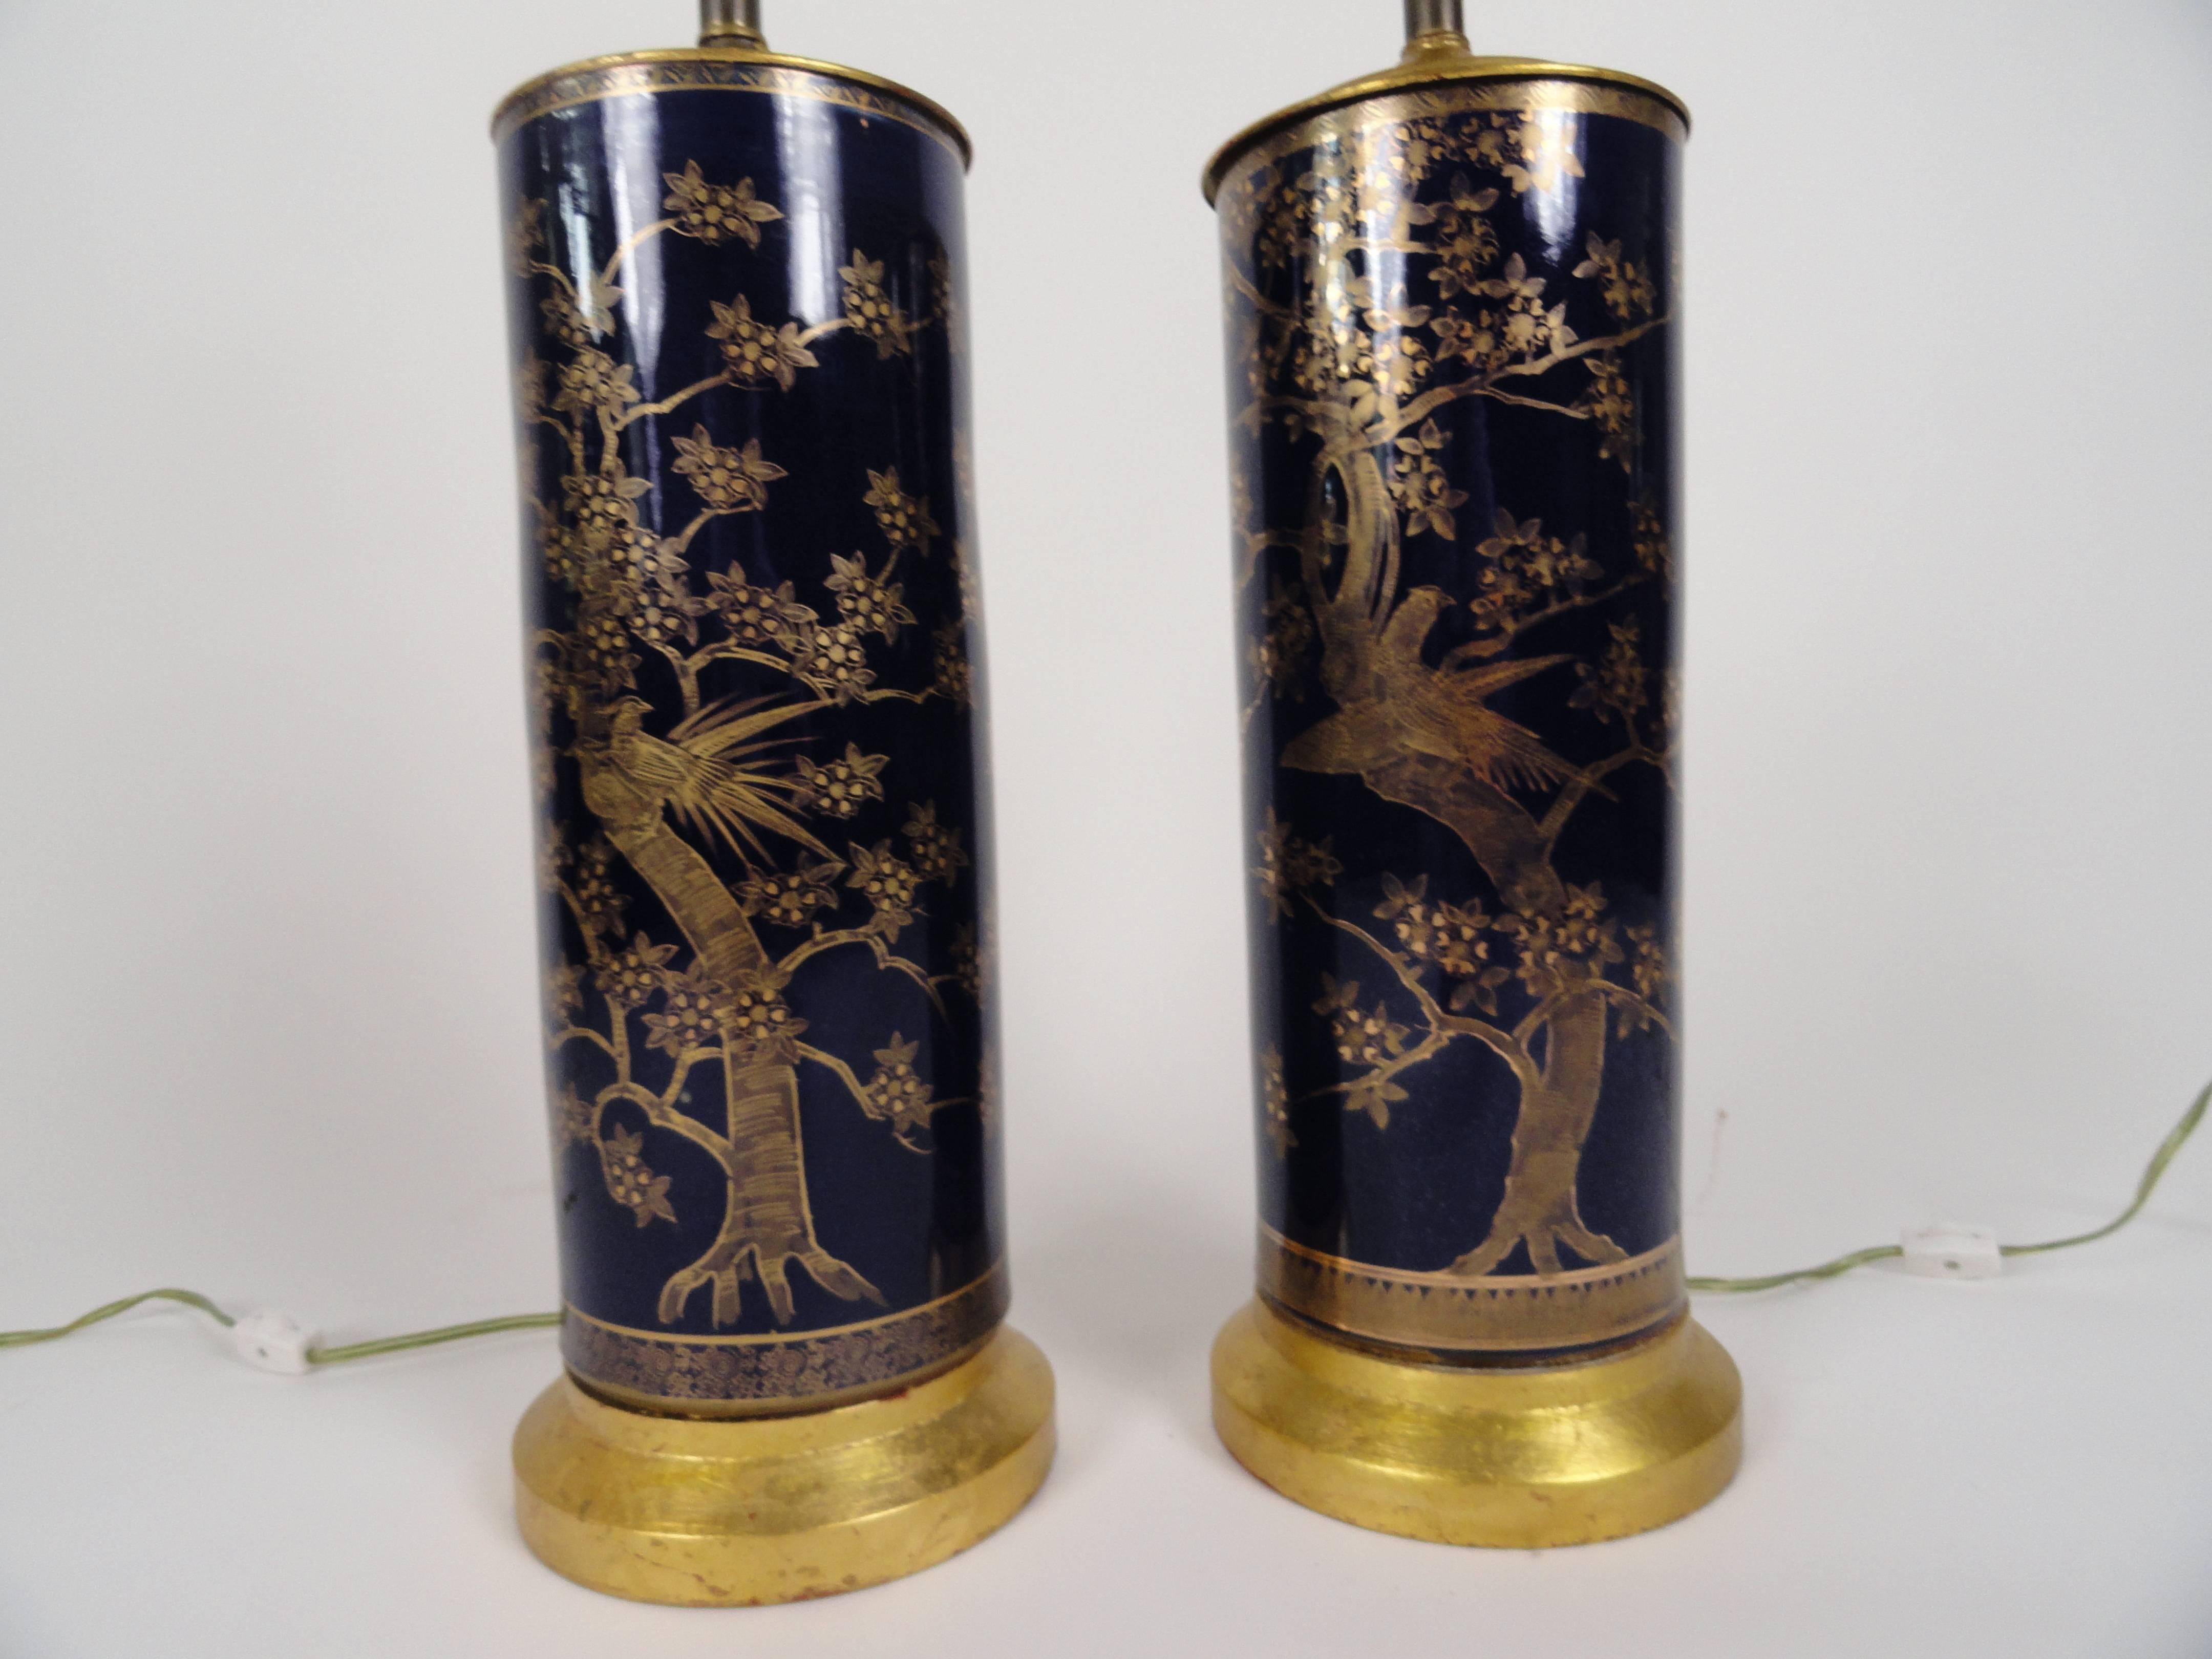 Pair of powder blue porcelain lamps with hand-painted gilt decoration of birds and blooming flowered branches. Highly glazed. Gold leaf wood bases. Rewired with inline switch.